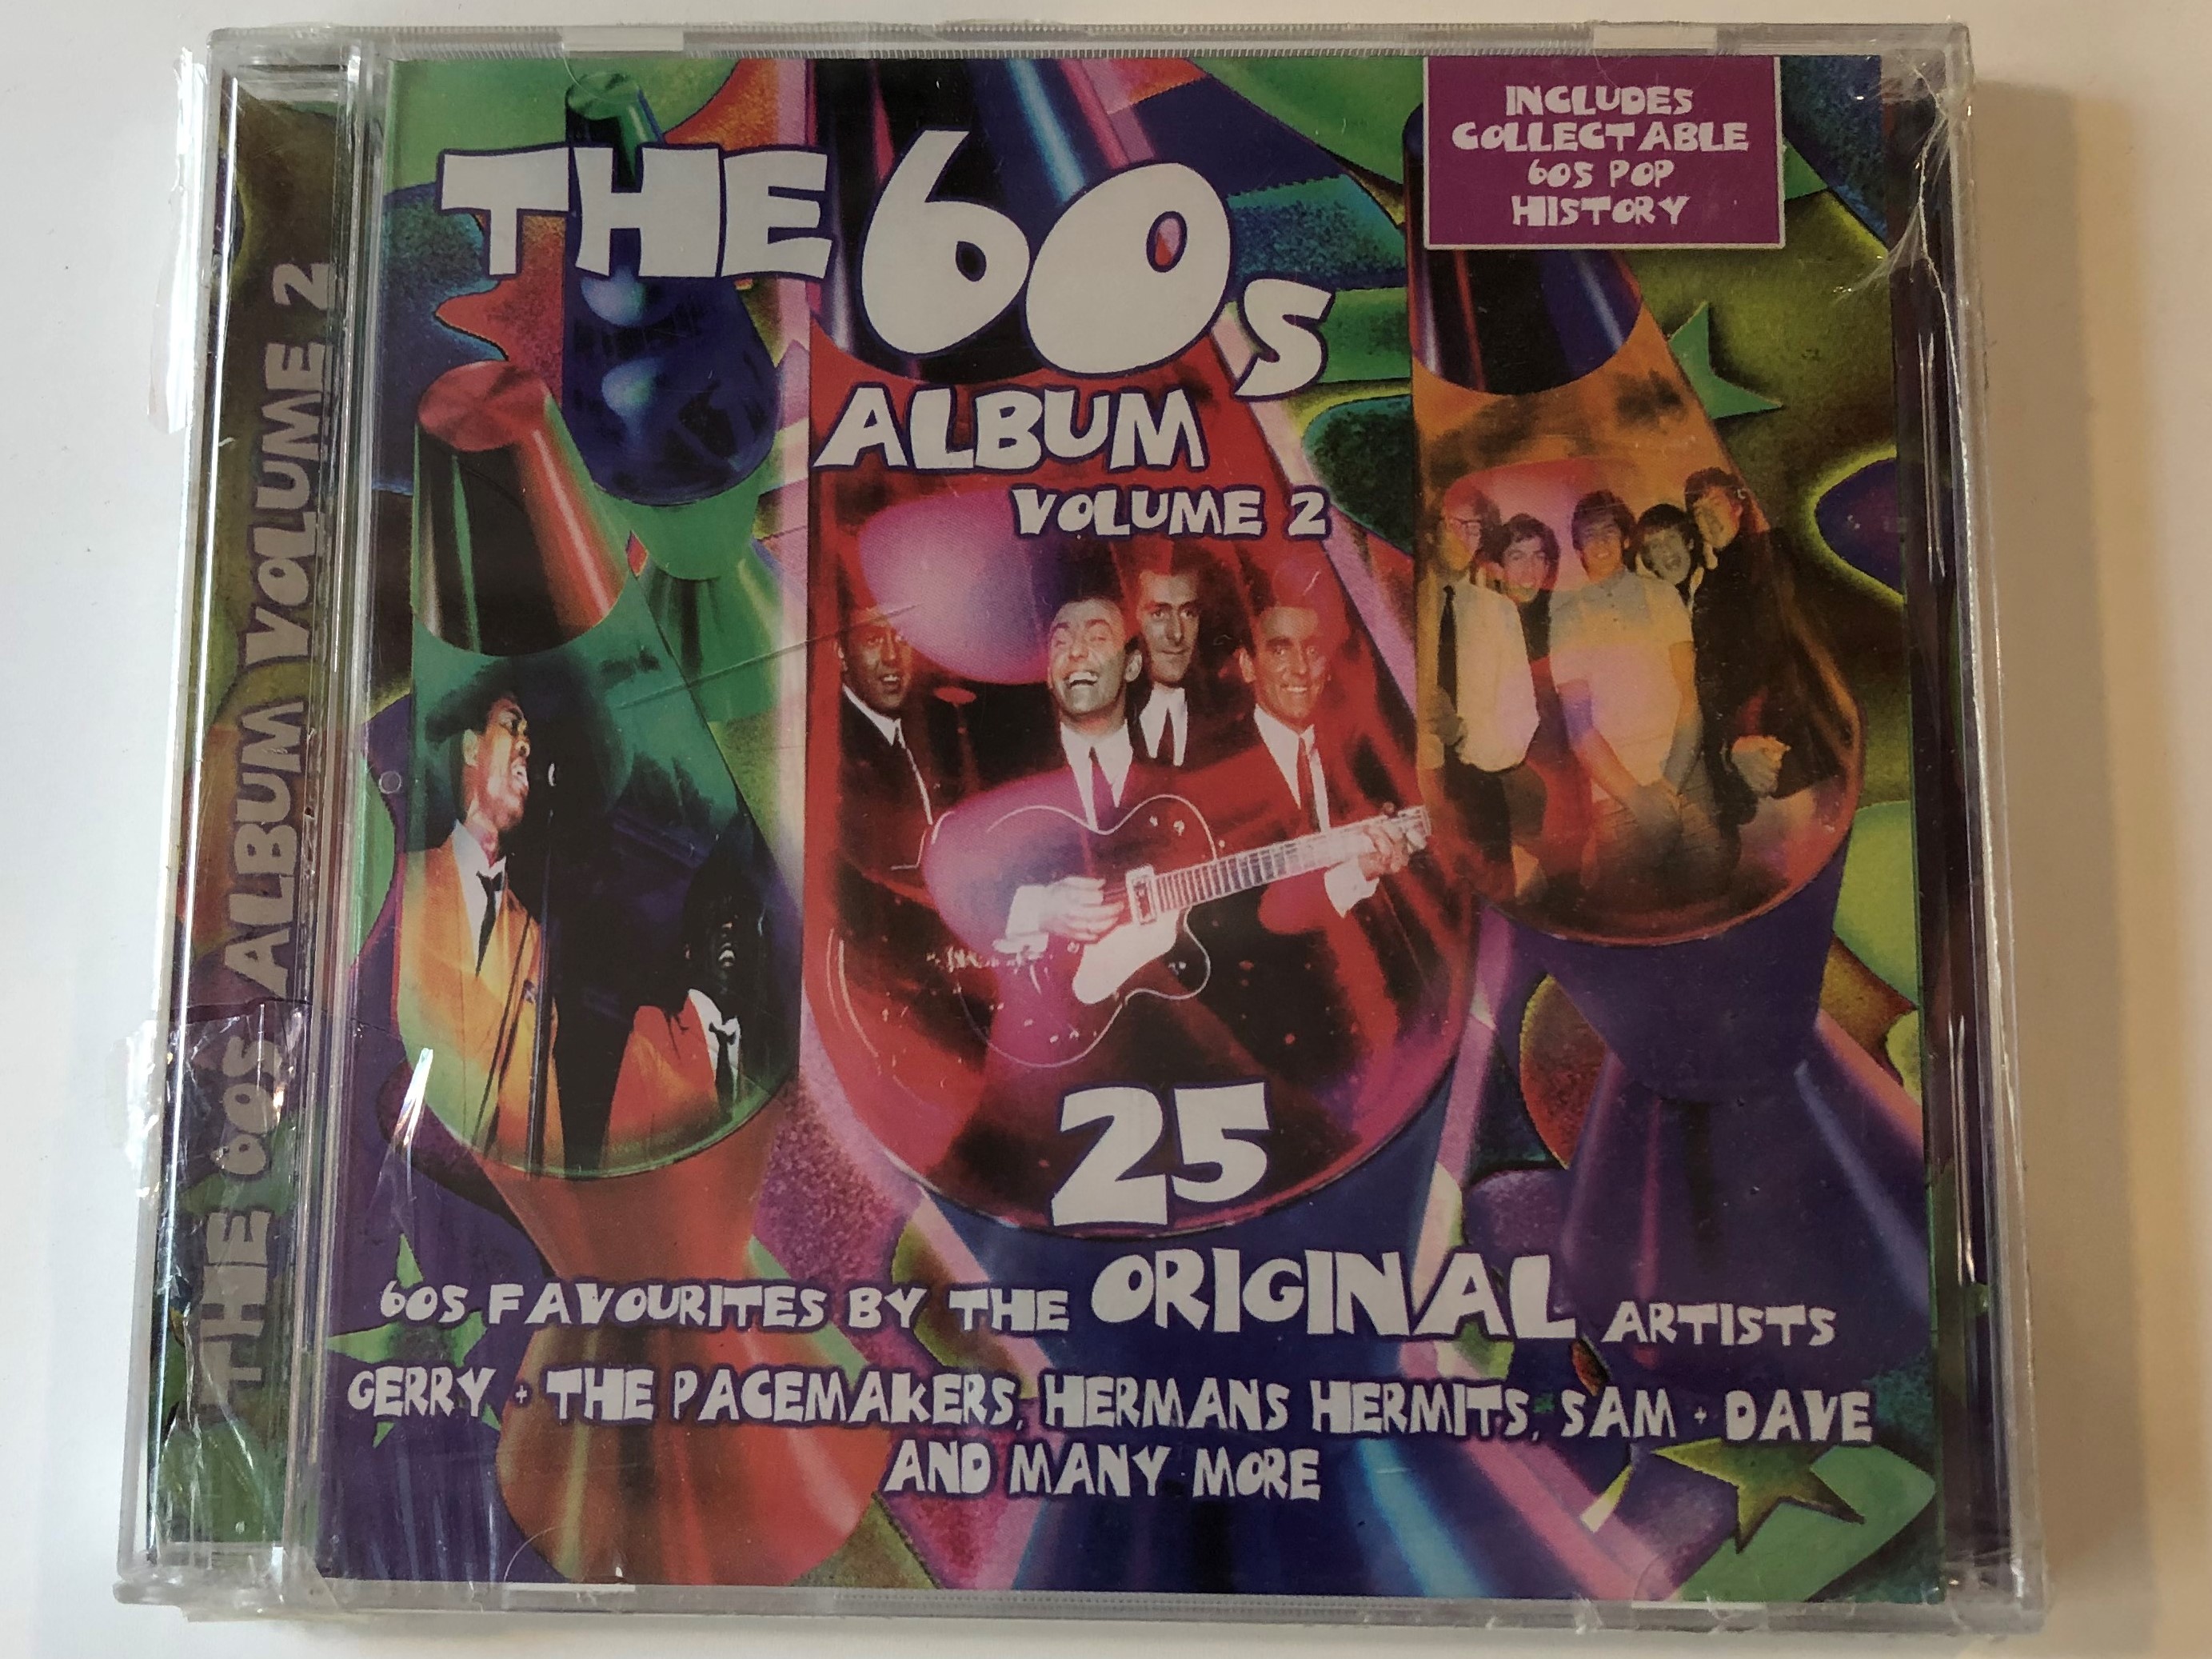 the-60s-album-volume-2-60s-favourites-by-the-25-original-artists-gerry-the-pacemakers-herman-s-hermits-sam-dave-and-many-more-includes-collectable-60s-pop-history-going-for-a-song-a-1-.jpg